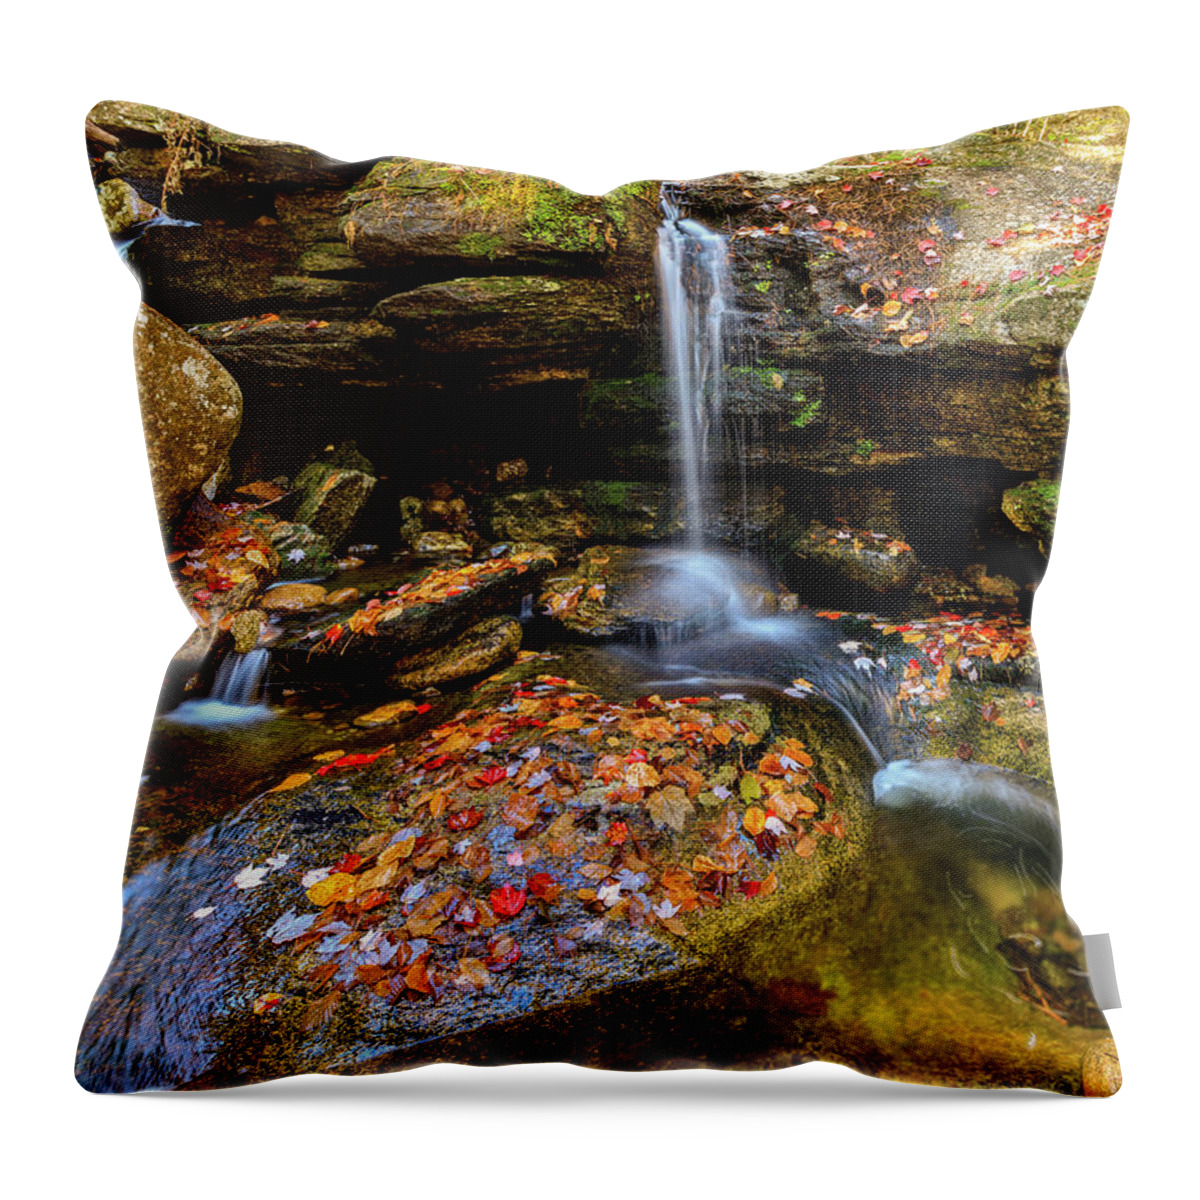 Diana's Baths; New Hampshire; New England; Waterfall; Falls; Autumn; Fall; Season; Color; Colorful; Leaves; Rocks; Romantic; Love; Heart; Beat; Relationship; Tender; Emotion; Desire; Landscape; Rob Davies; Photography; Conway; No Person Throw Pillow featuring the photograph Love Heart by Rob Davies